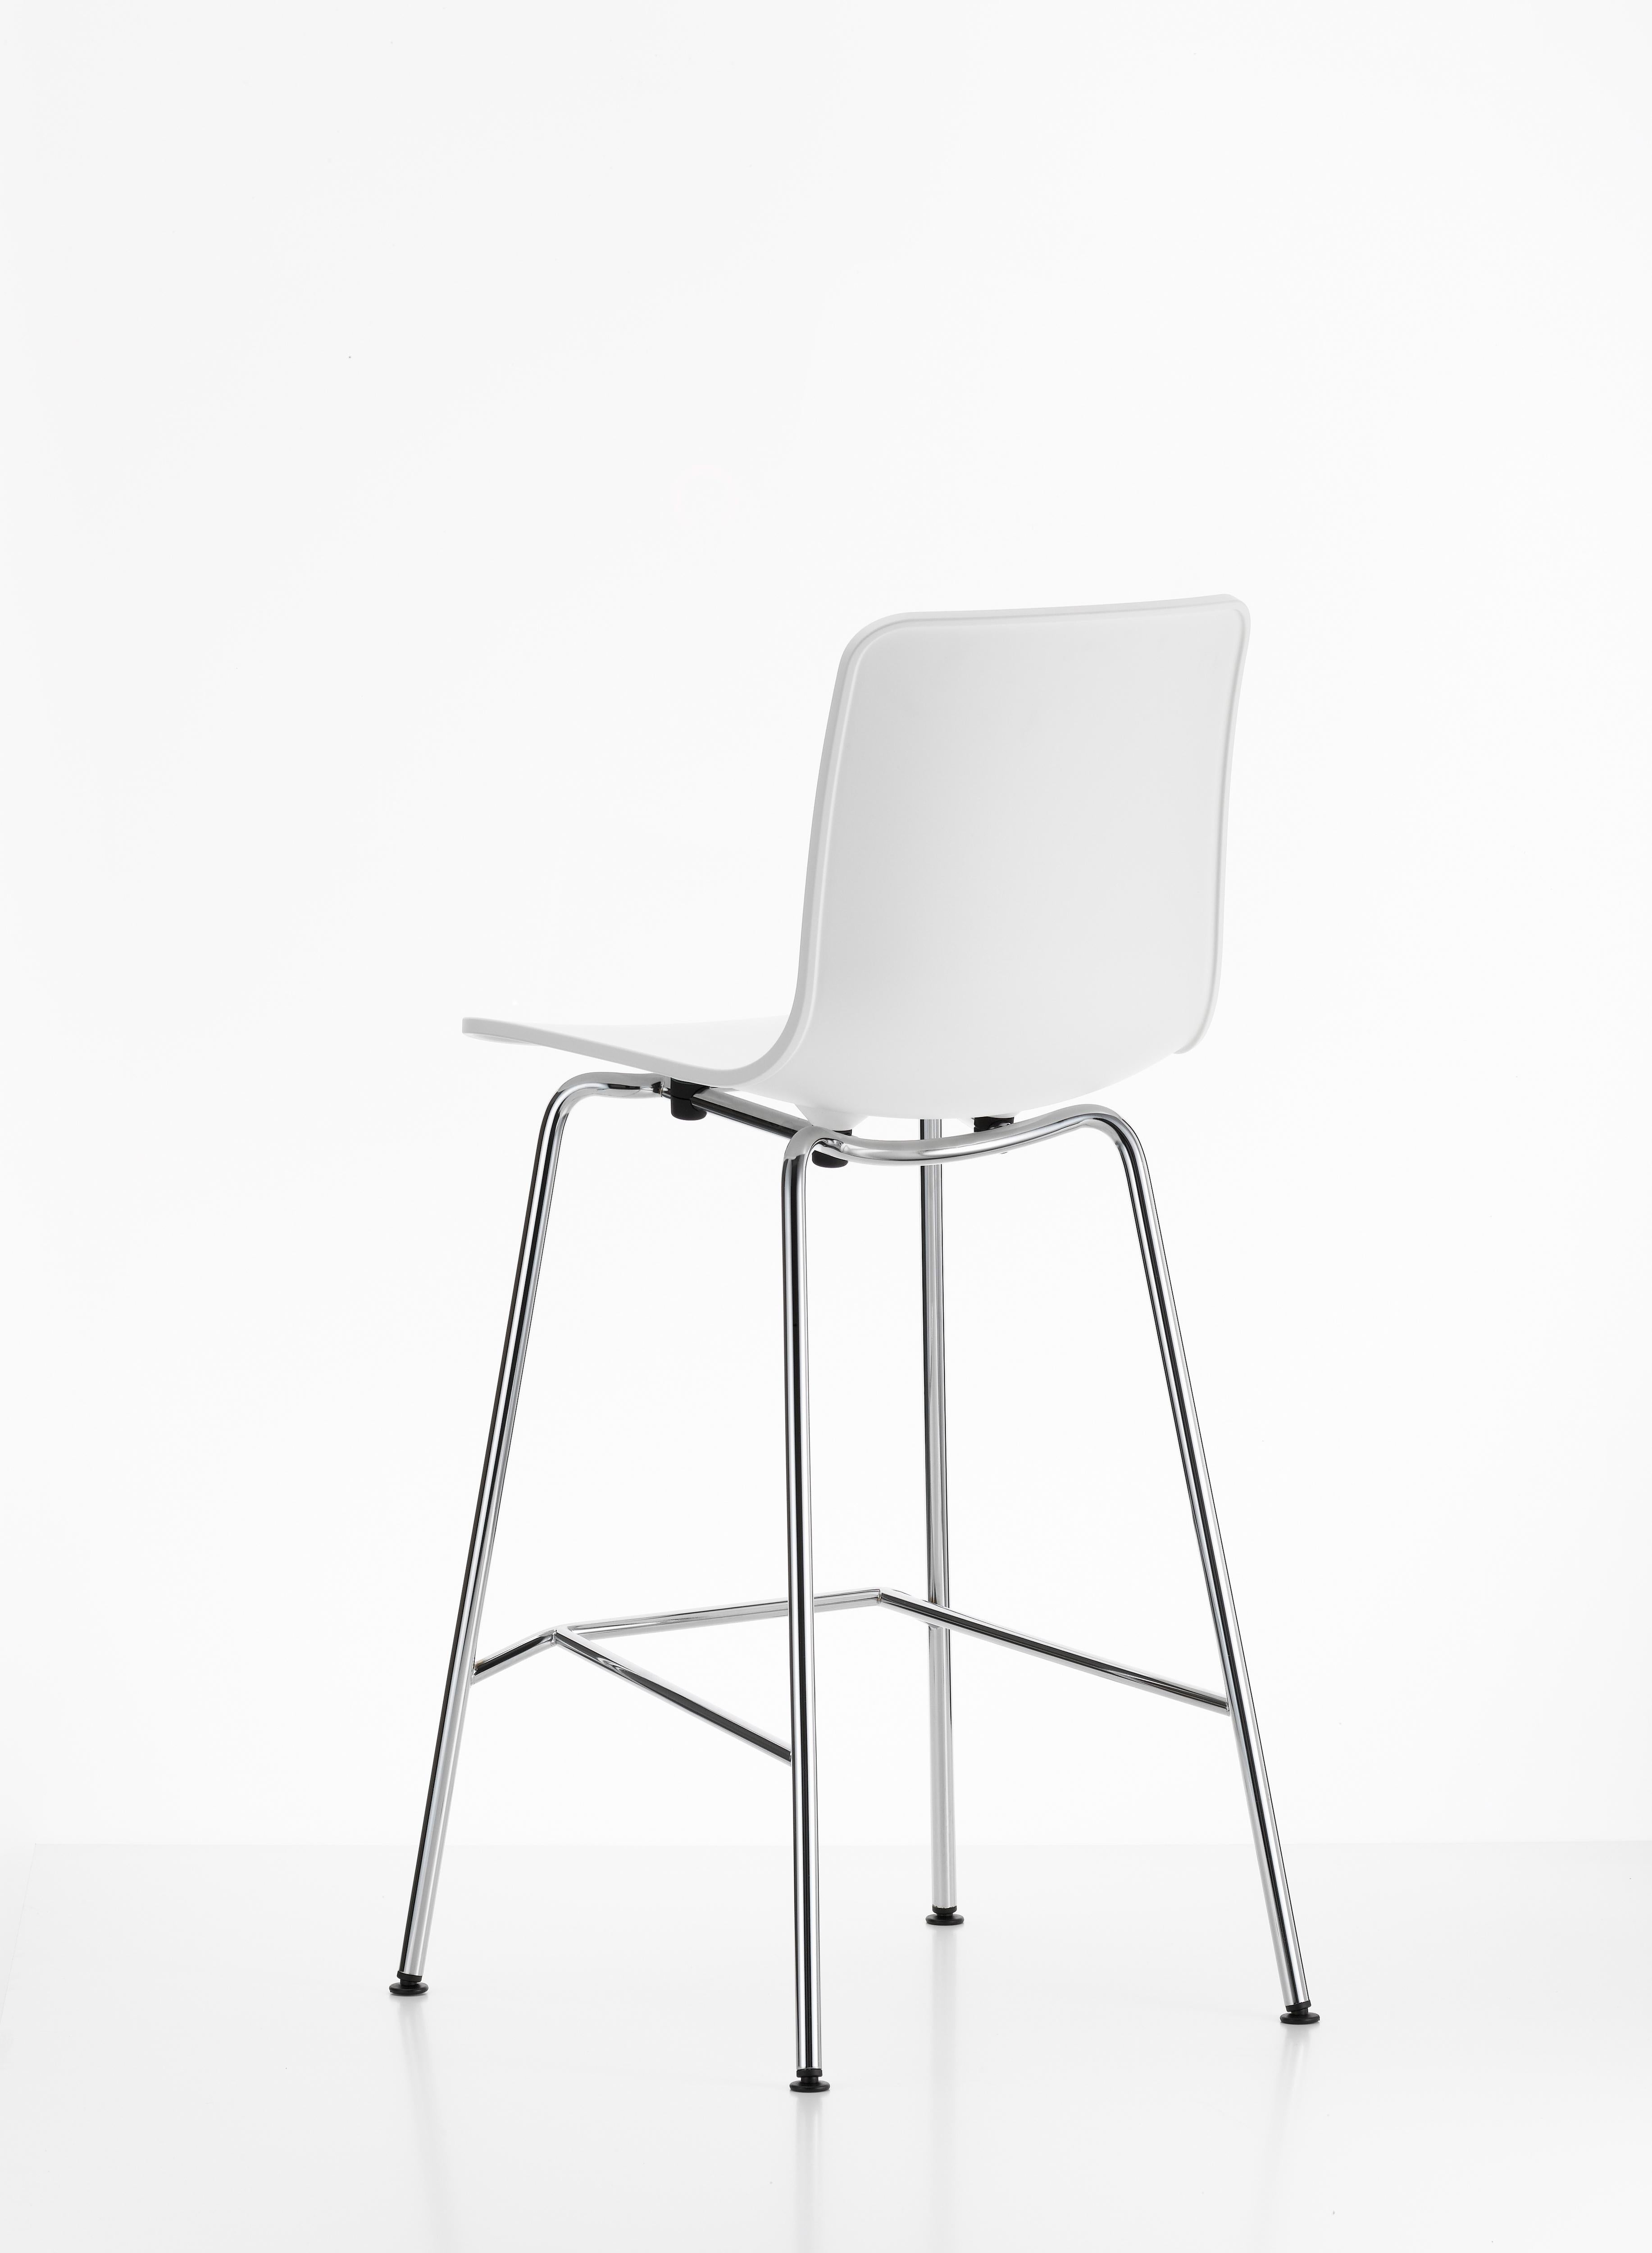 These products are only available in the United States.

The HAL stool medium has a medium-height seat, ideal for tables or counters which are lower than standard.

Materials:
Seat shell: Dyed-through polypropylene.
Base: Chrome-plated tubular